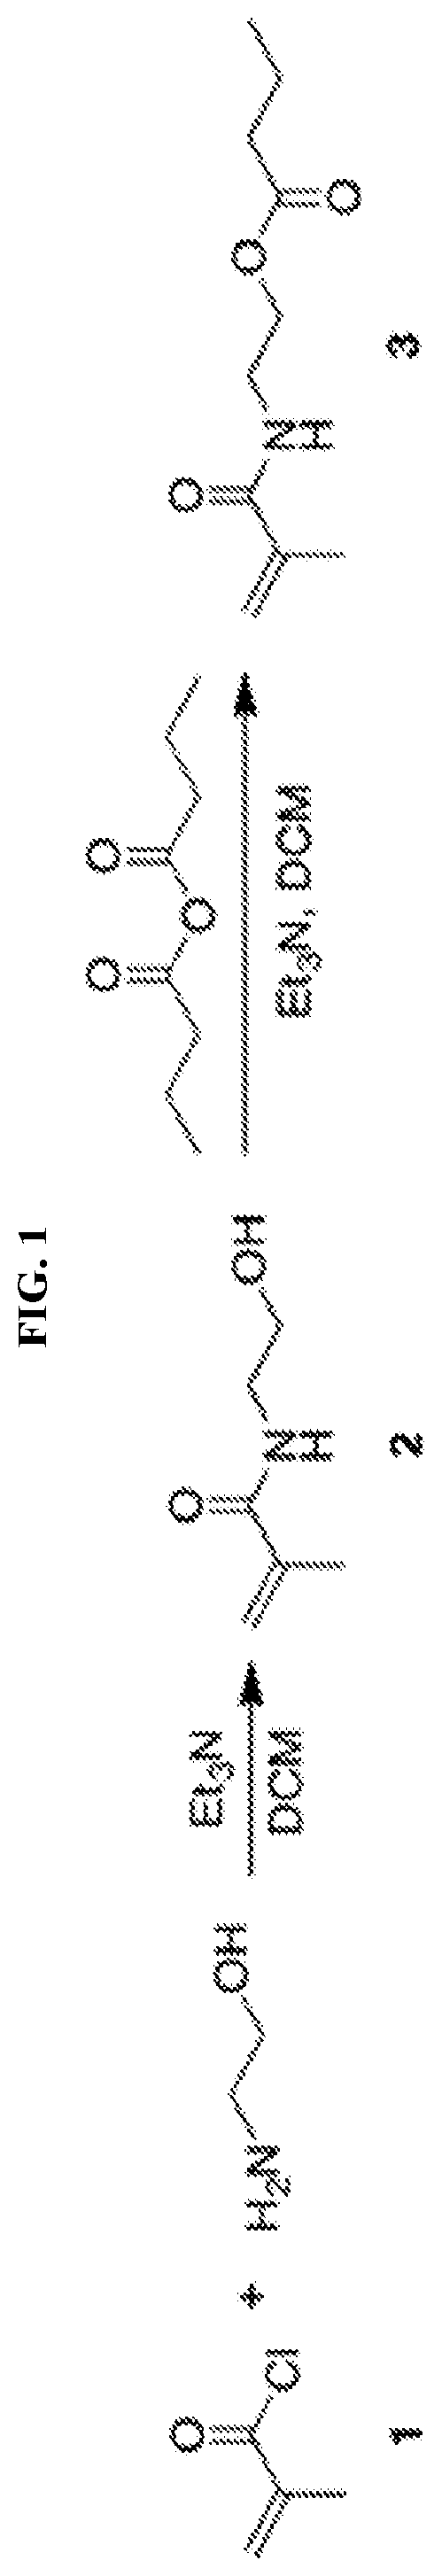 Polymer materials for delivery of short chain fatty acids to the intestine for applications in human health and treatment of disease